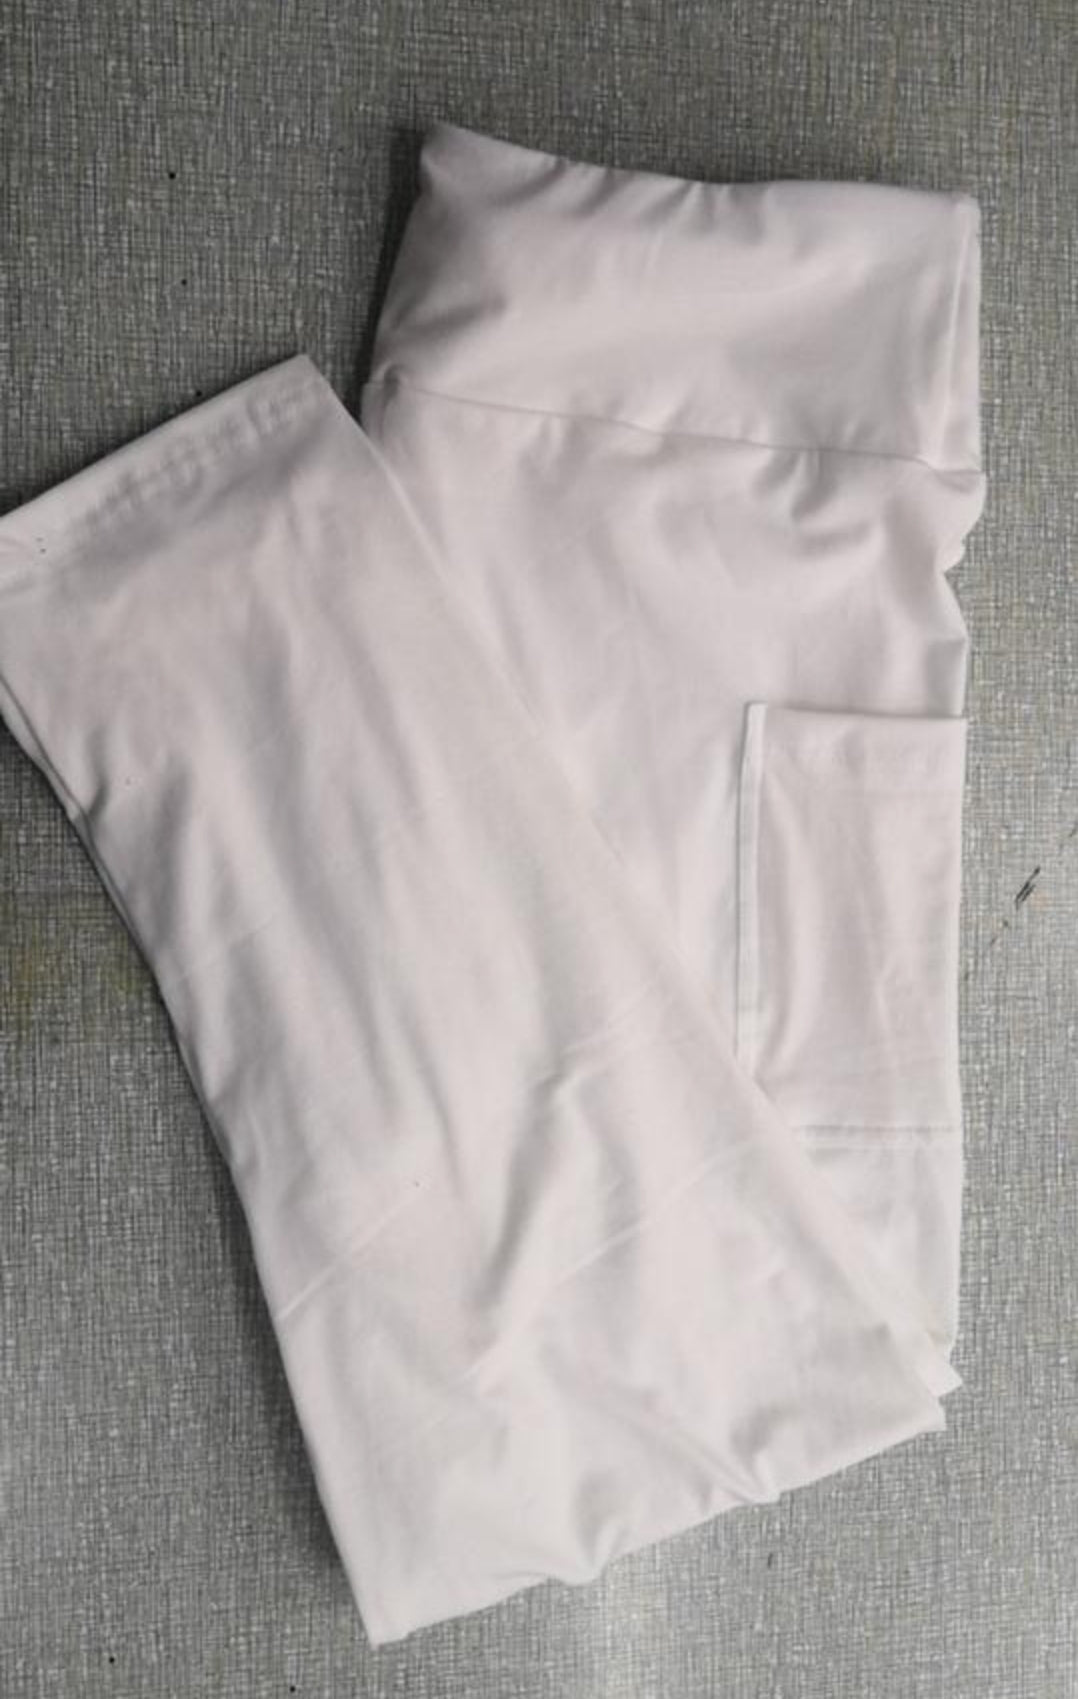 White (light cream) capris and shorts with pockets